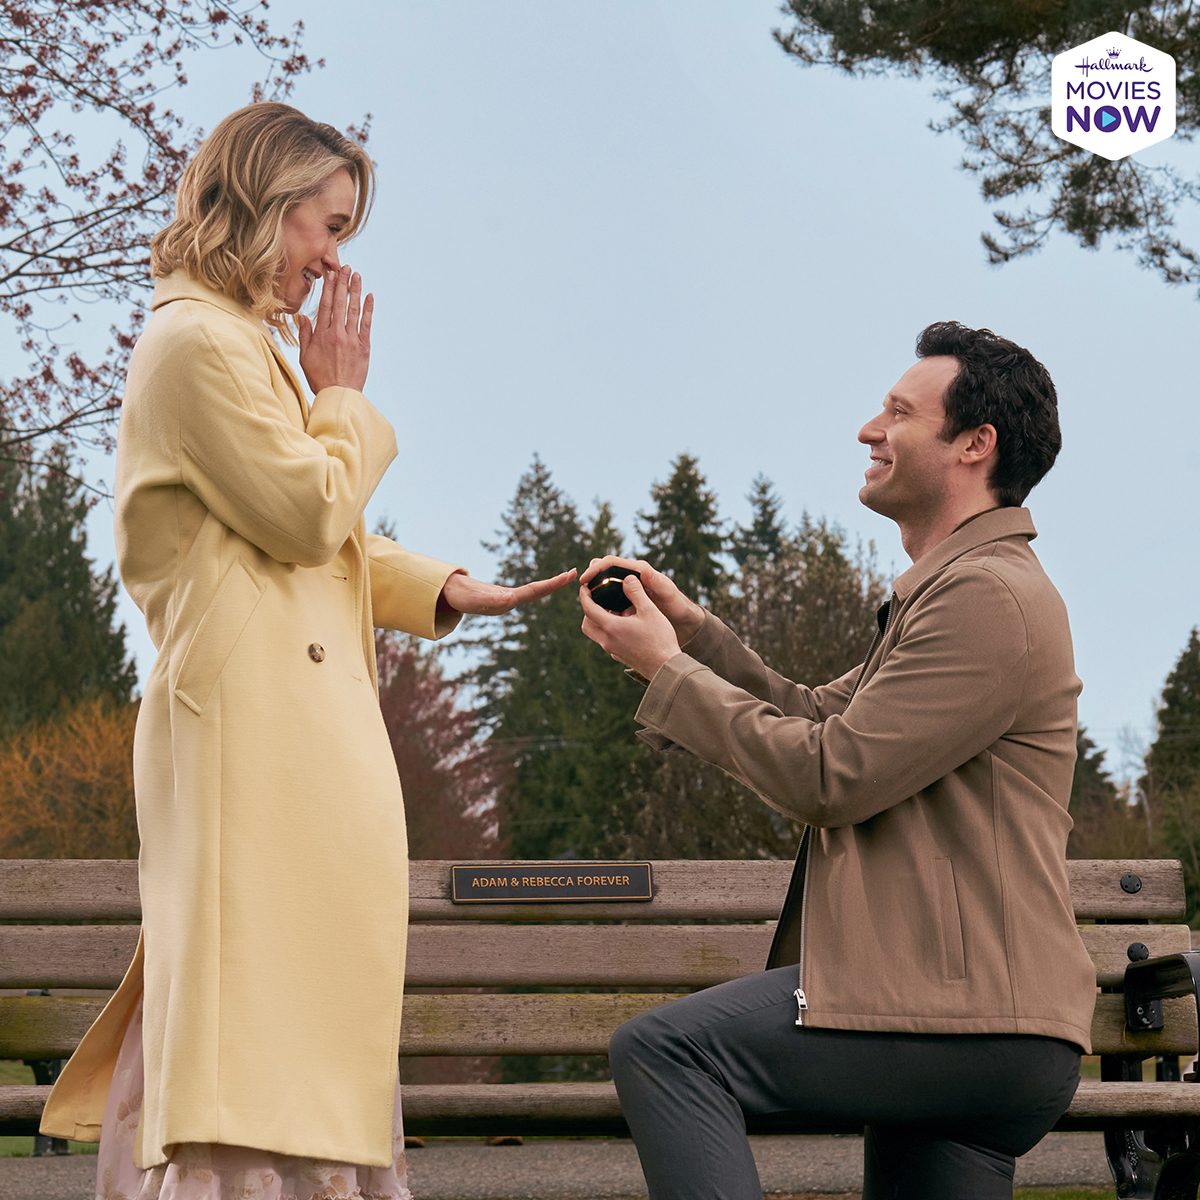 💍 Say 'I Do' to the perfect wedding experience in #TheWeddingContract starring #BeccaTobin and #JakeEpstein now on #HallmarkMoviesNow!